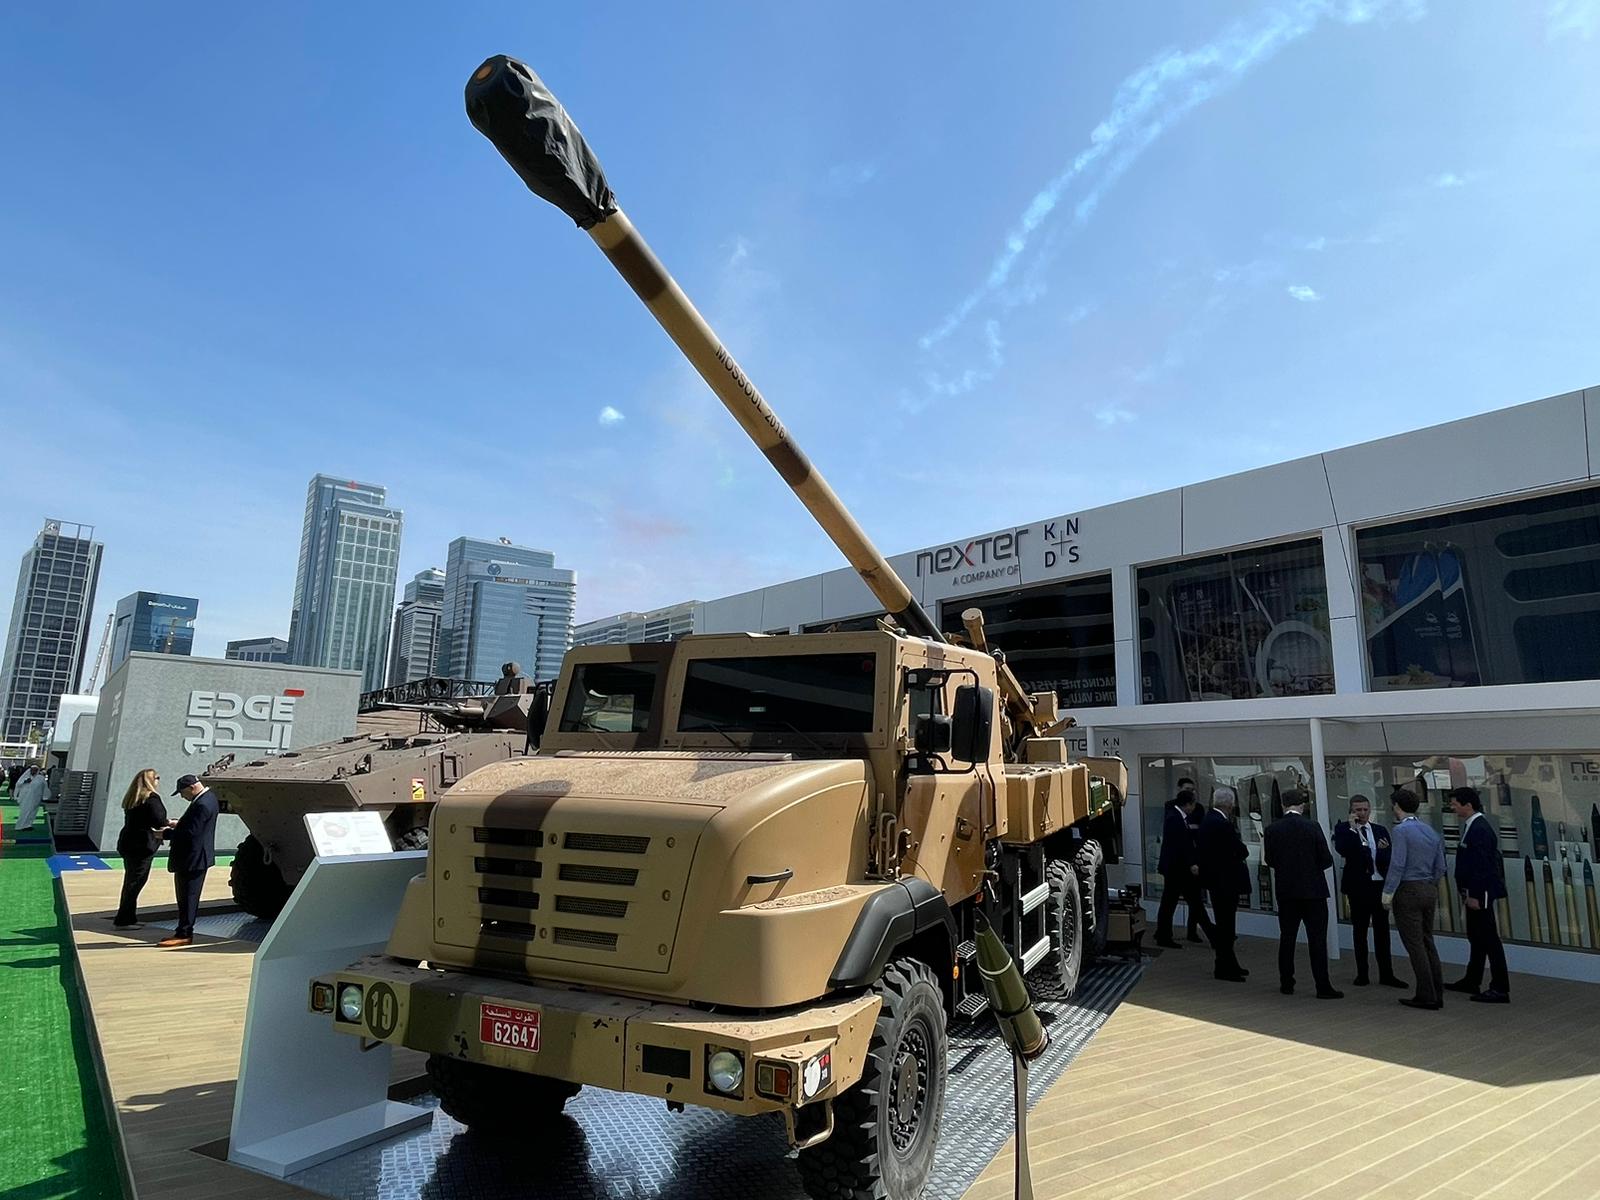 For the first time, JAGUAR and TITUS vehicles will be exhibited on the stand of Resource Industries, a key player in the UAE defence industry. Nexter and Resource Industries are exploring the possibility of industrial cooperation around these vehicles.